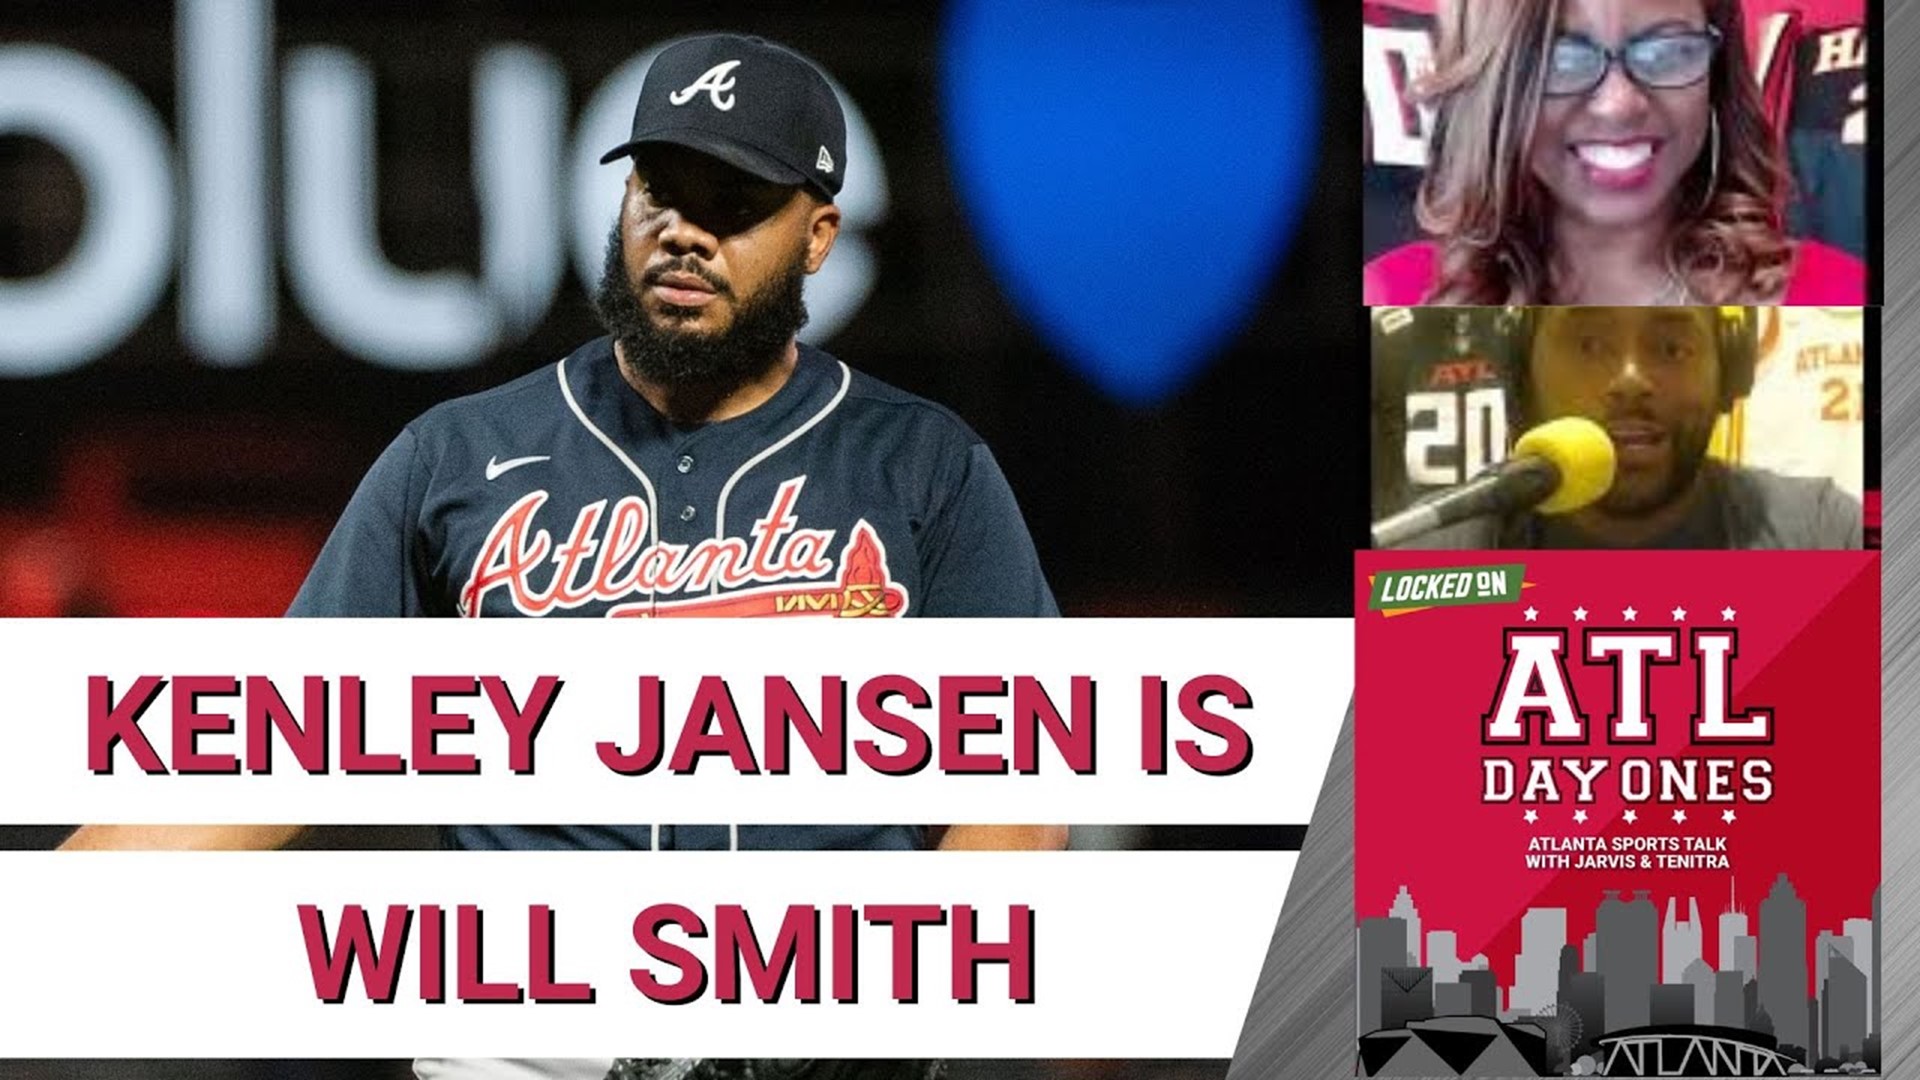 Kenley Jansen Is The 2022 Will Smith In Atlanta |ATL Day Ones With Jarvis n Tenitra